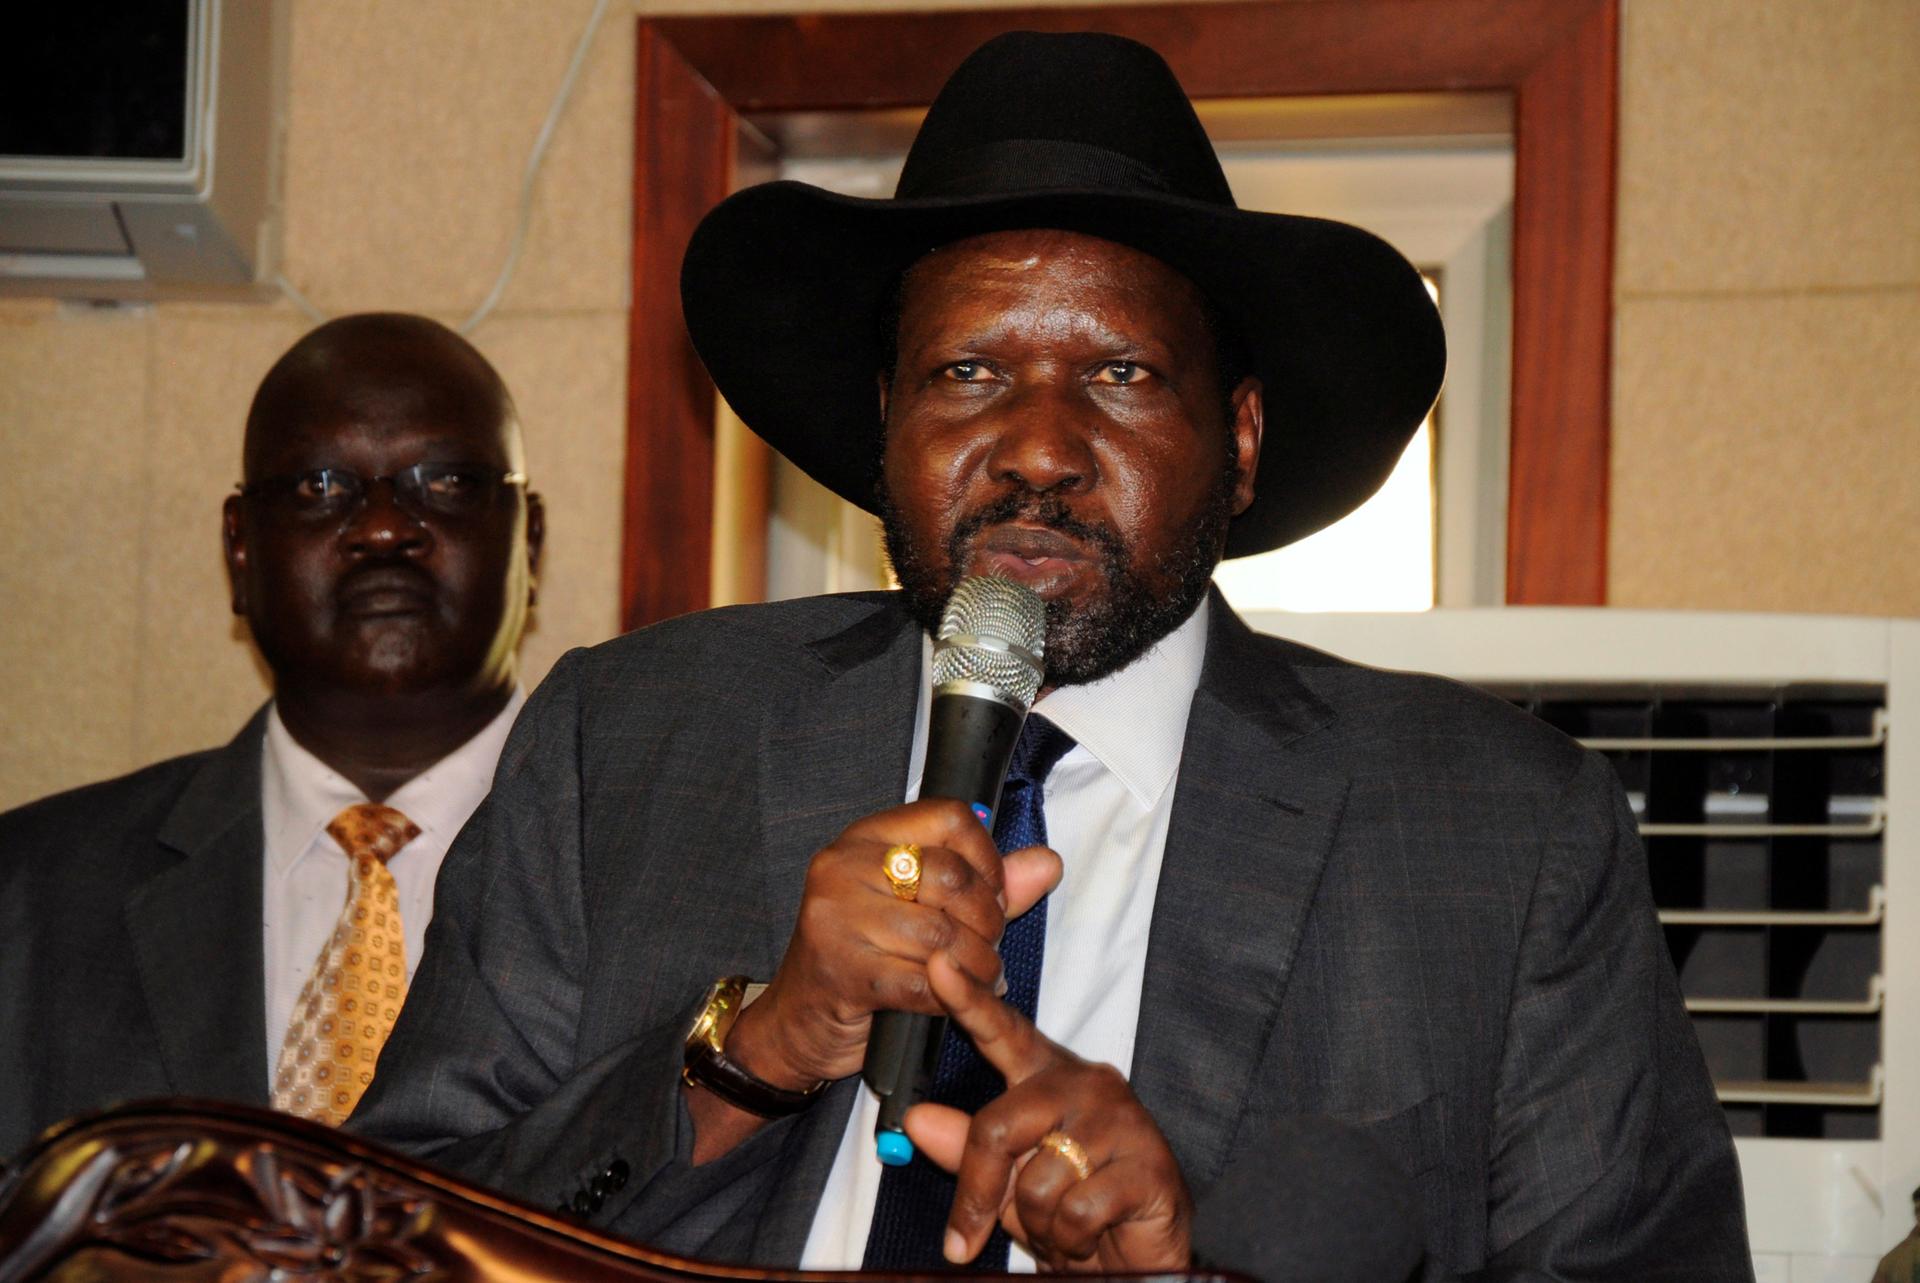 South Sudan's President Salva Kiir is condemned as part of a 'kleptocratic elite' in the report